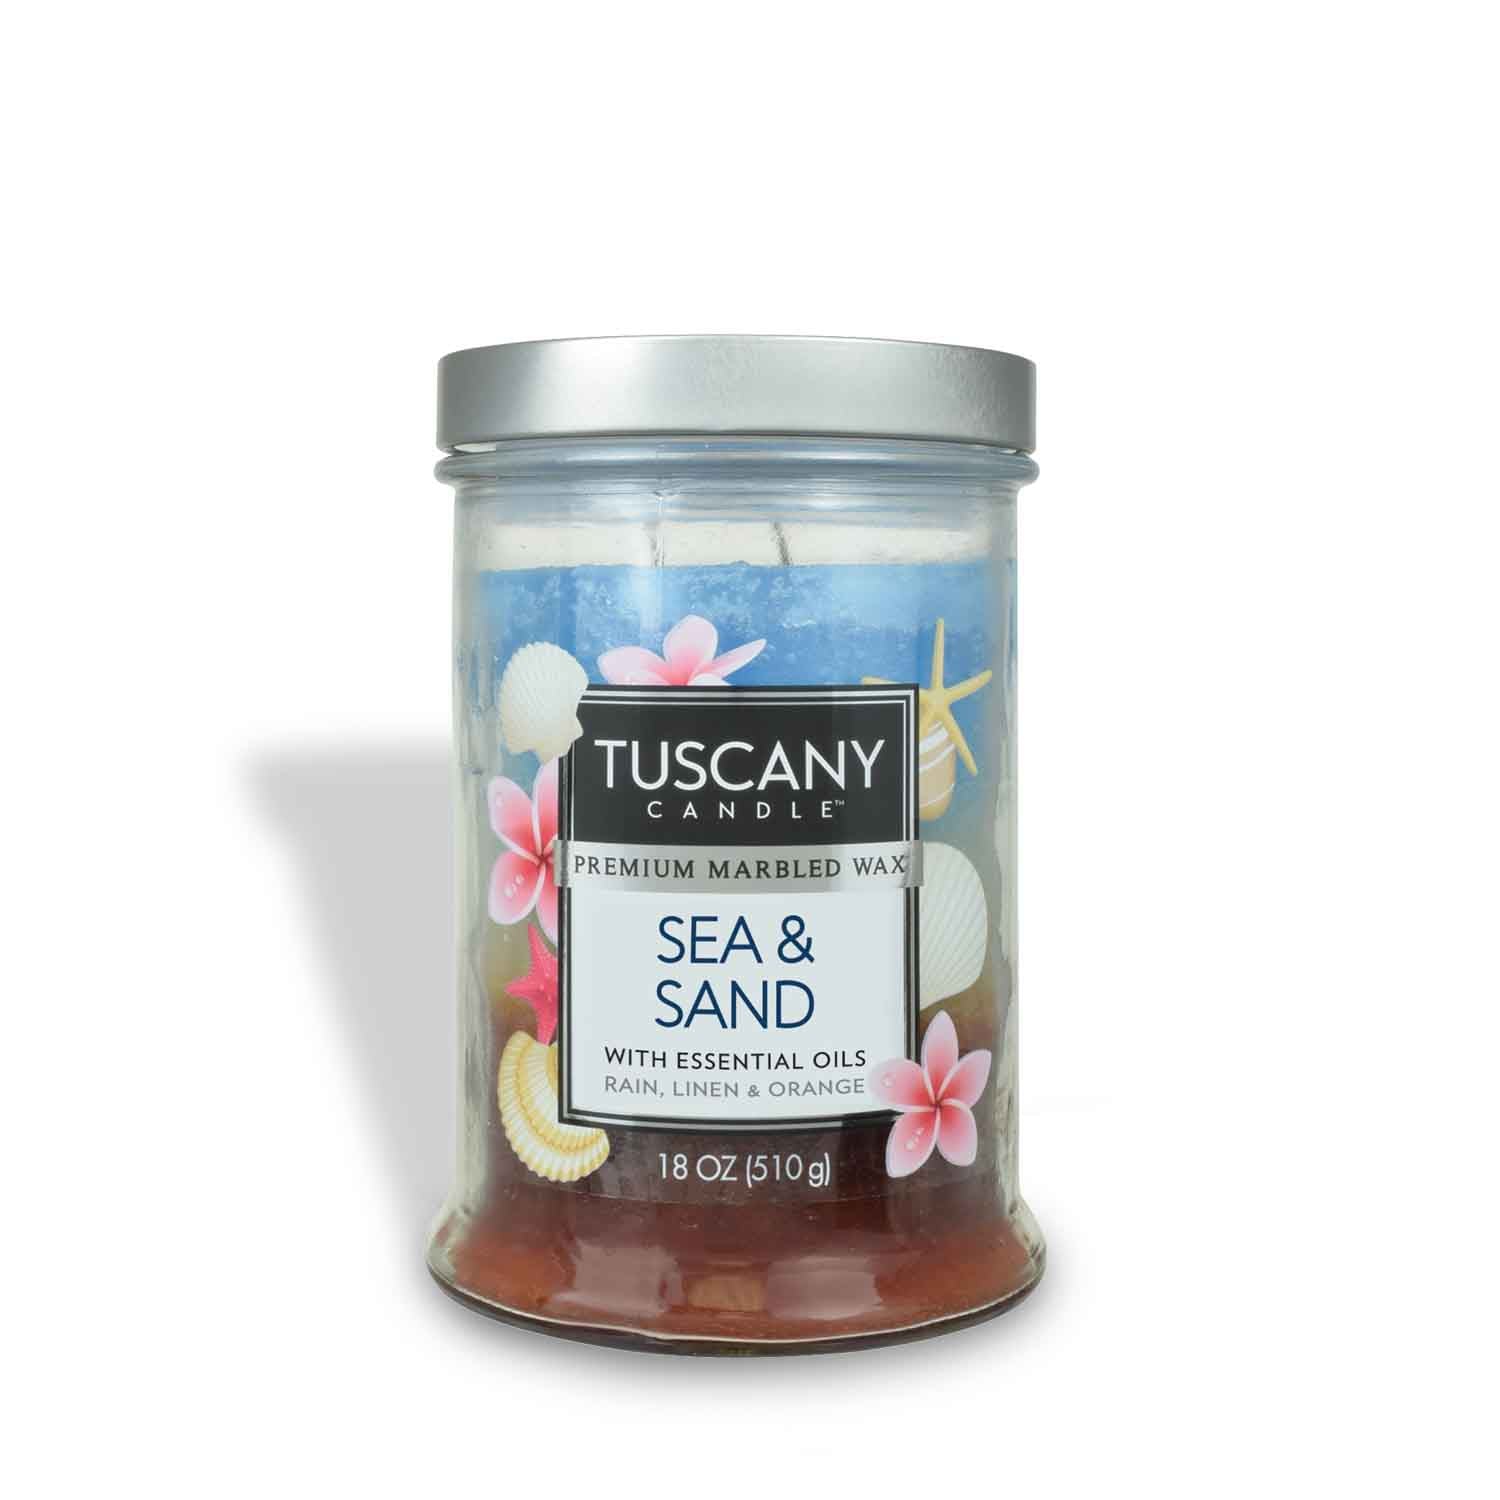 Tuscany Candle Premium Marbled Wax Candle Sea and Sand (18 oz)